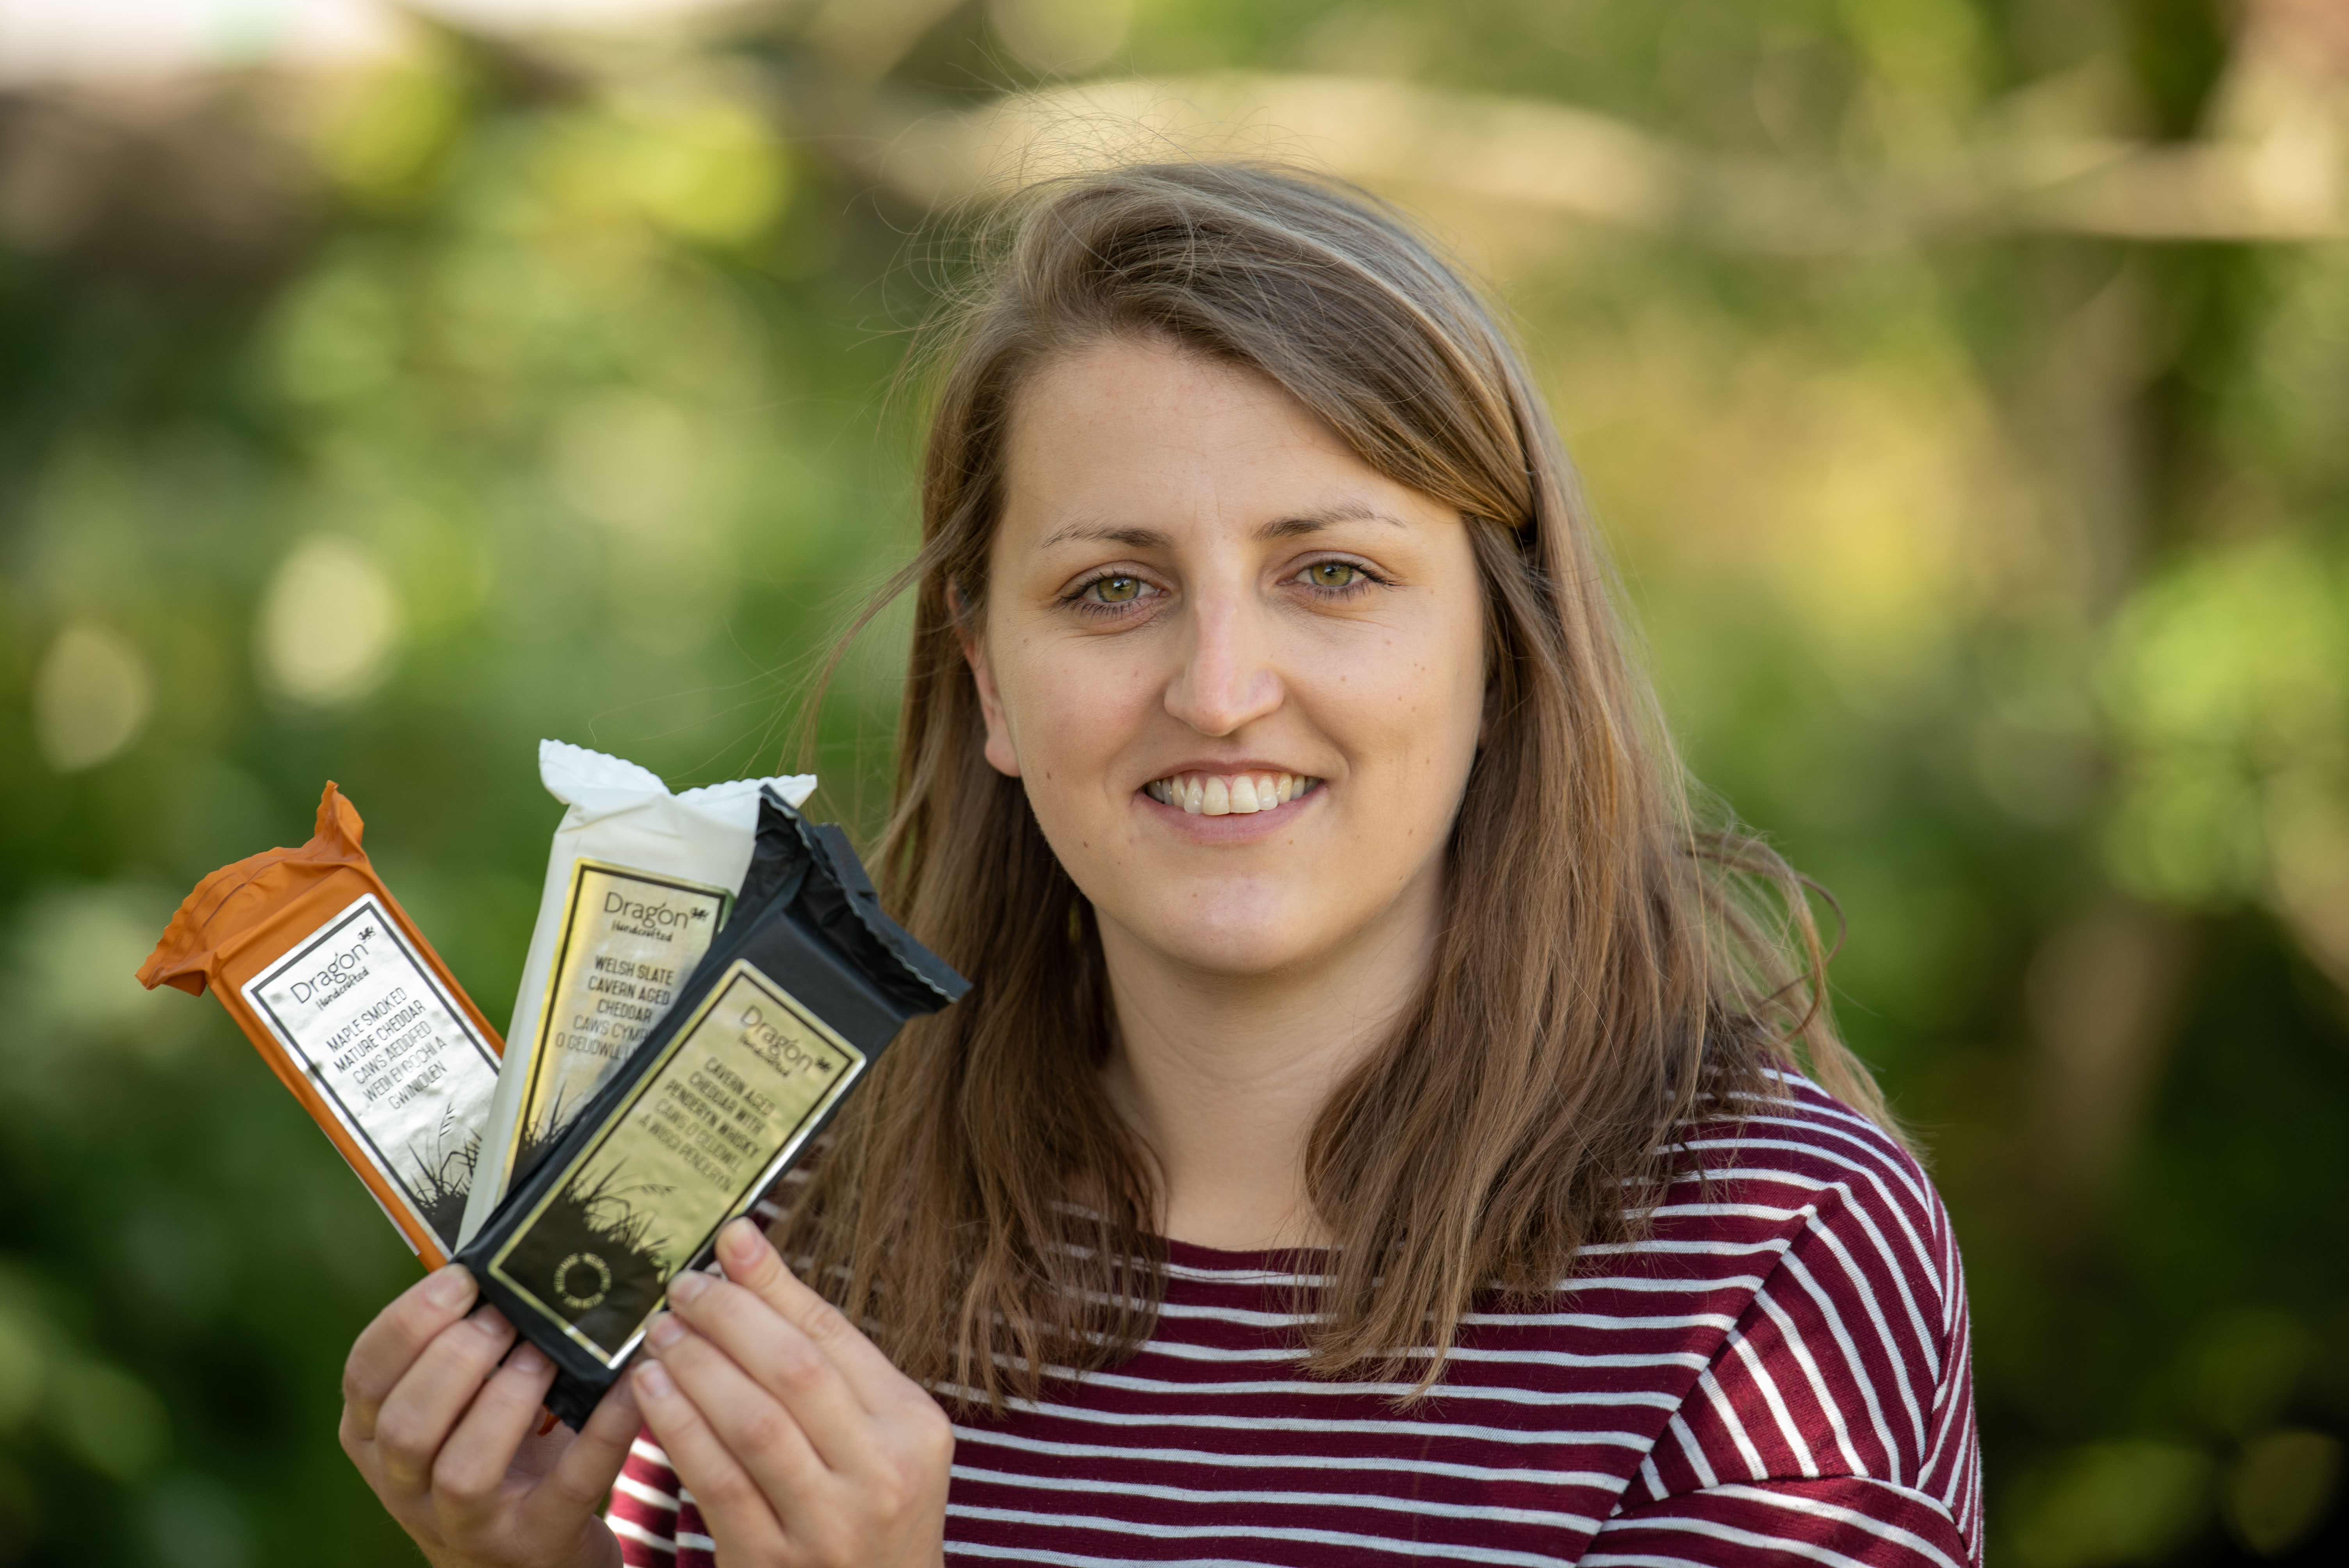 Dragon boosted by Tesco listing for handcrafted cheese range